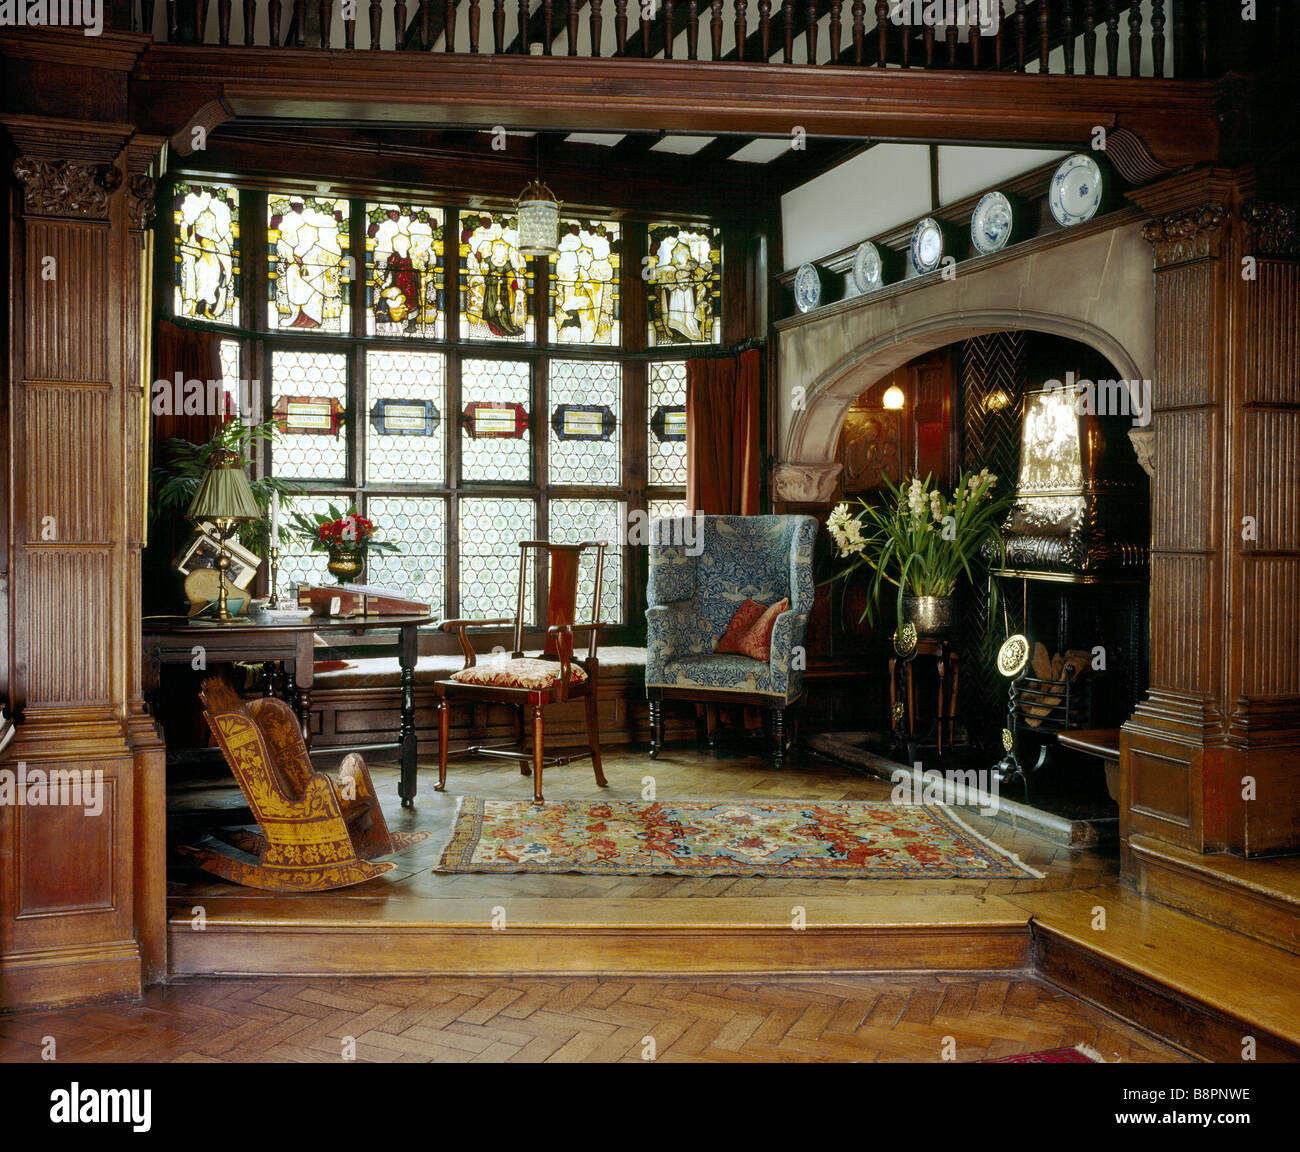 The Hall Alcove At Wightwick Manor Showing The Fireplace Desk And